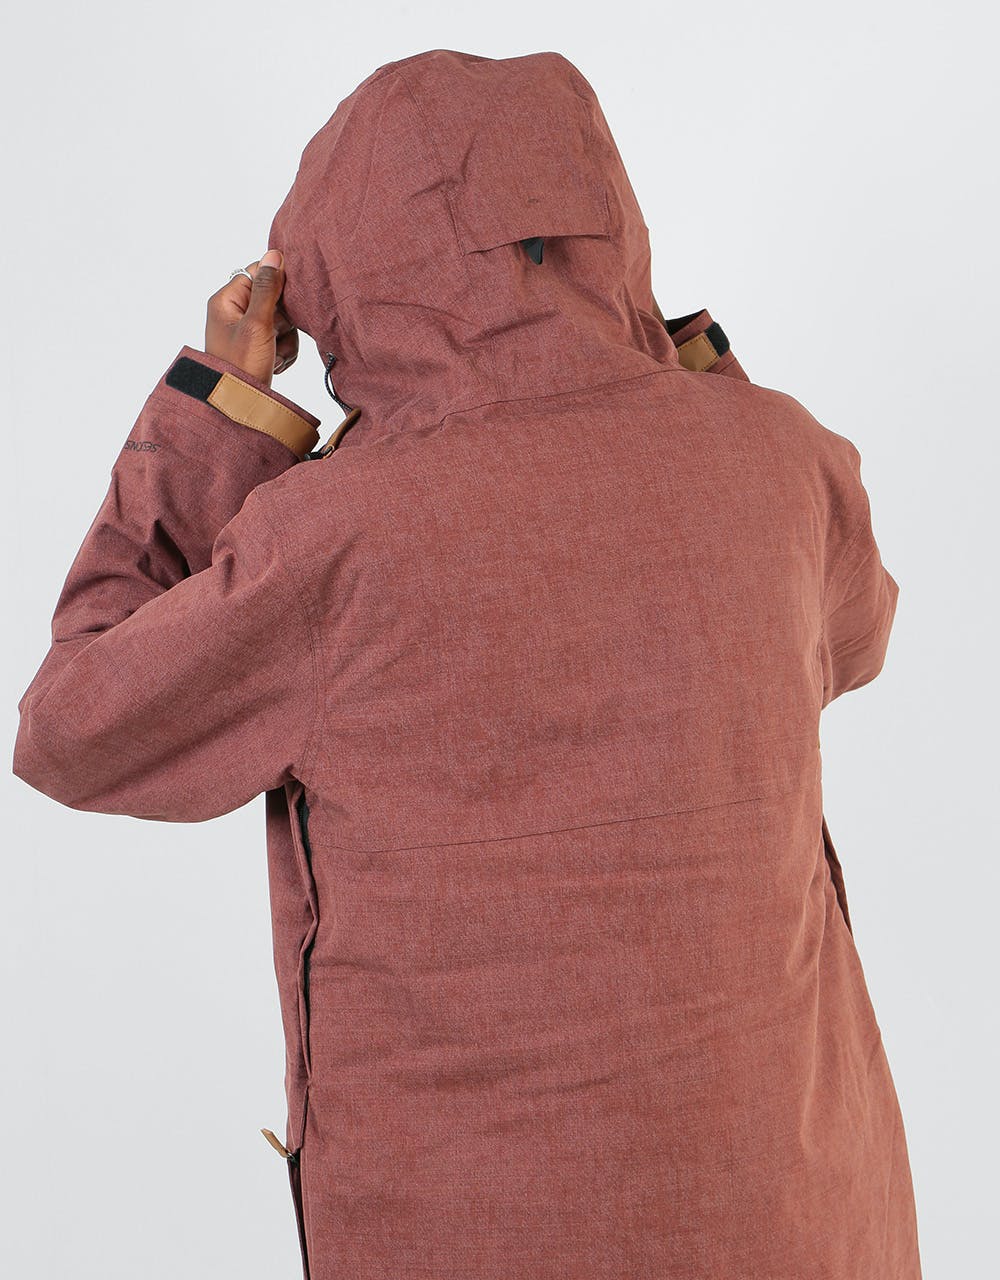 Sessions Supply Snowboard Jacket - Maroon